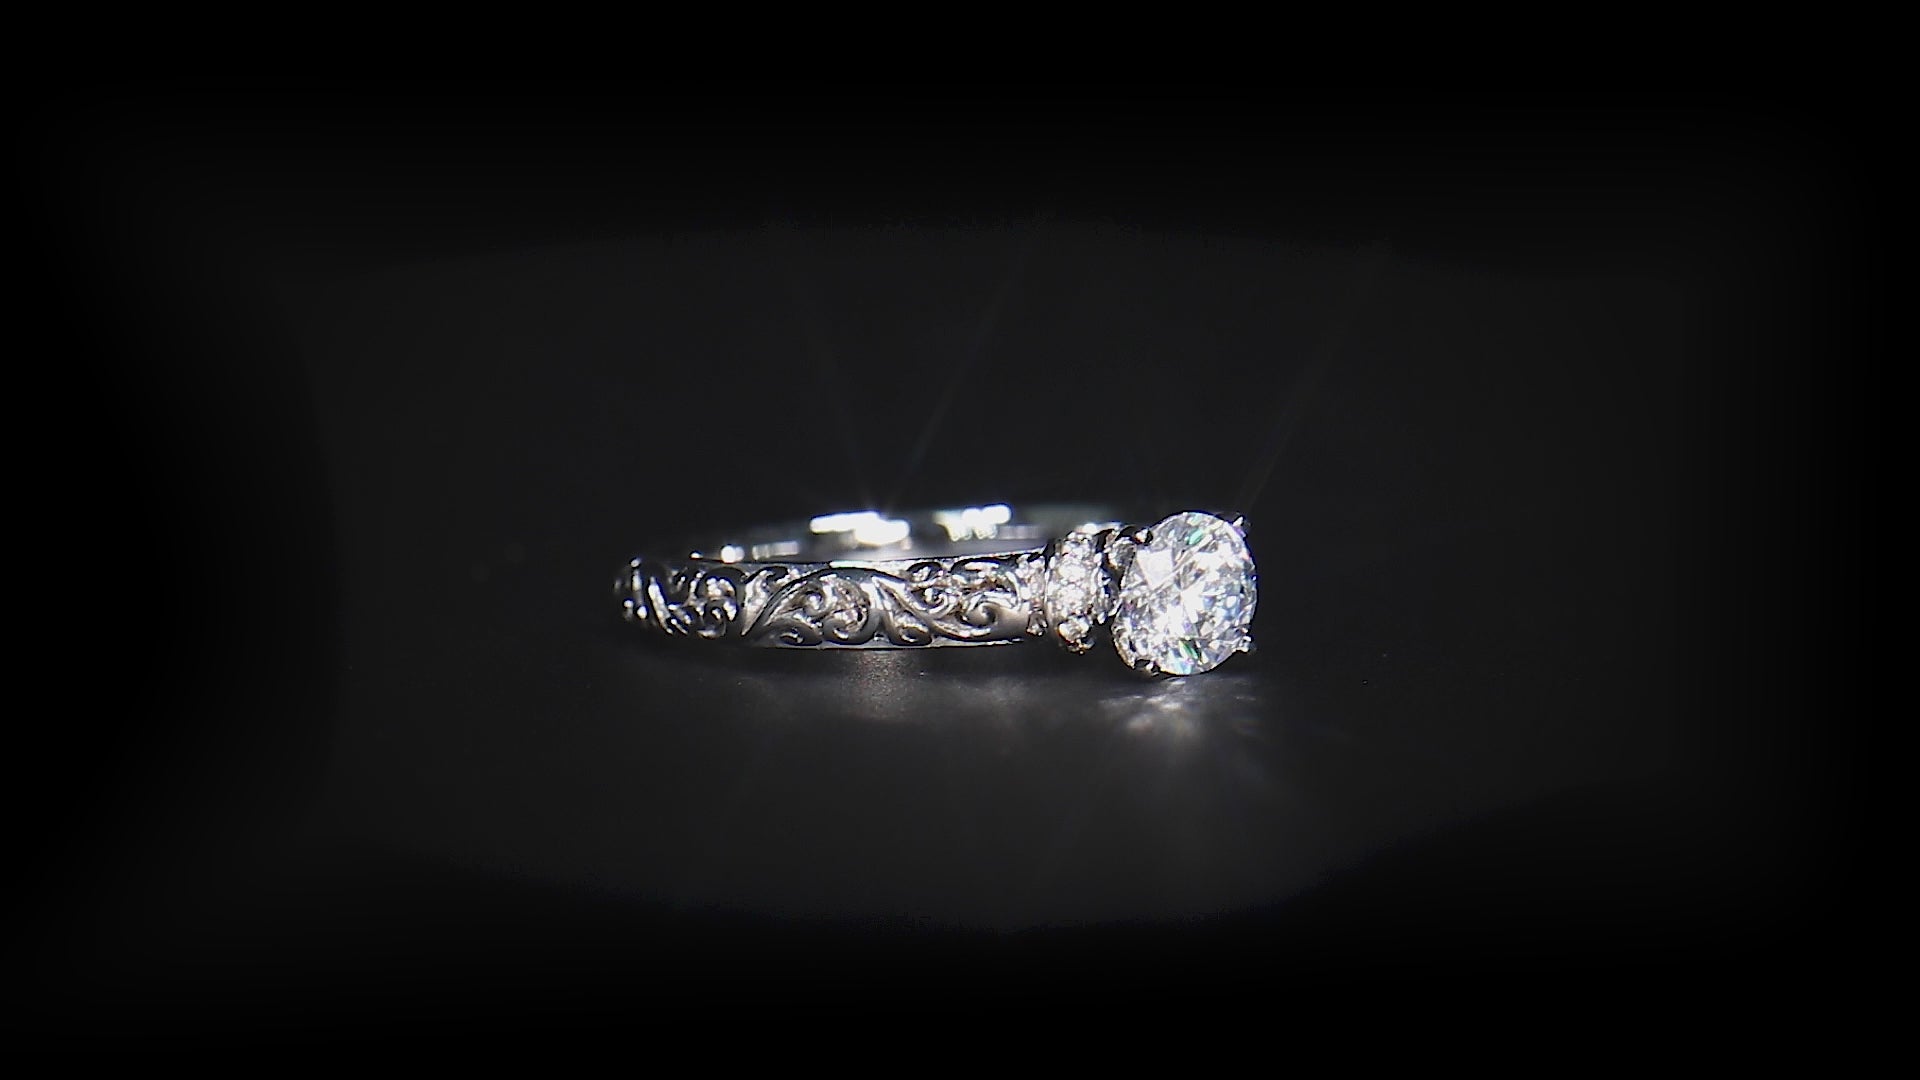 18K/ 14K Gold 2.3 mm LH Carved Scroll Solitaire with V-Shaped Diamond Accents Engagement Ring